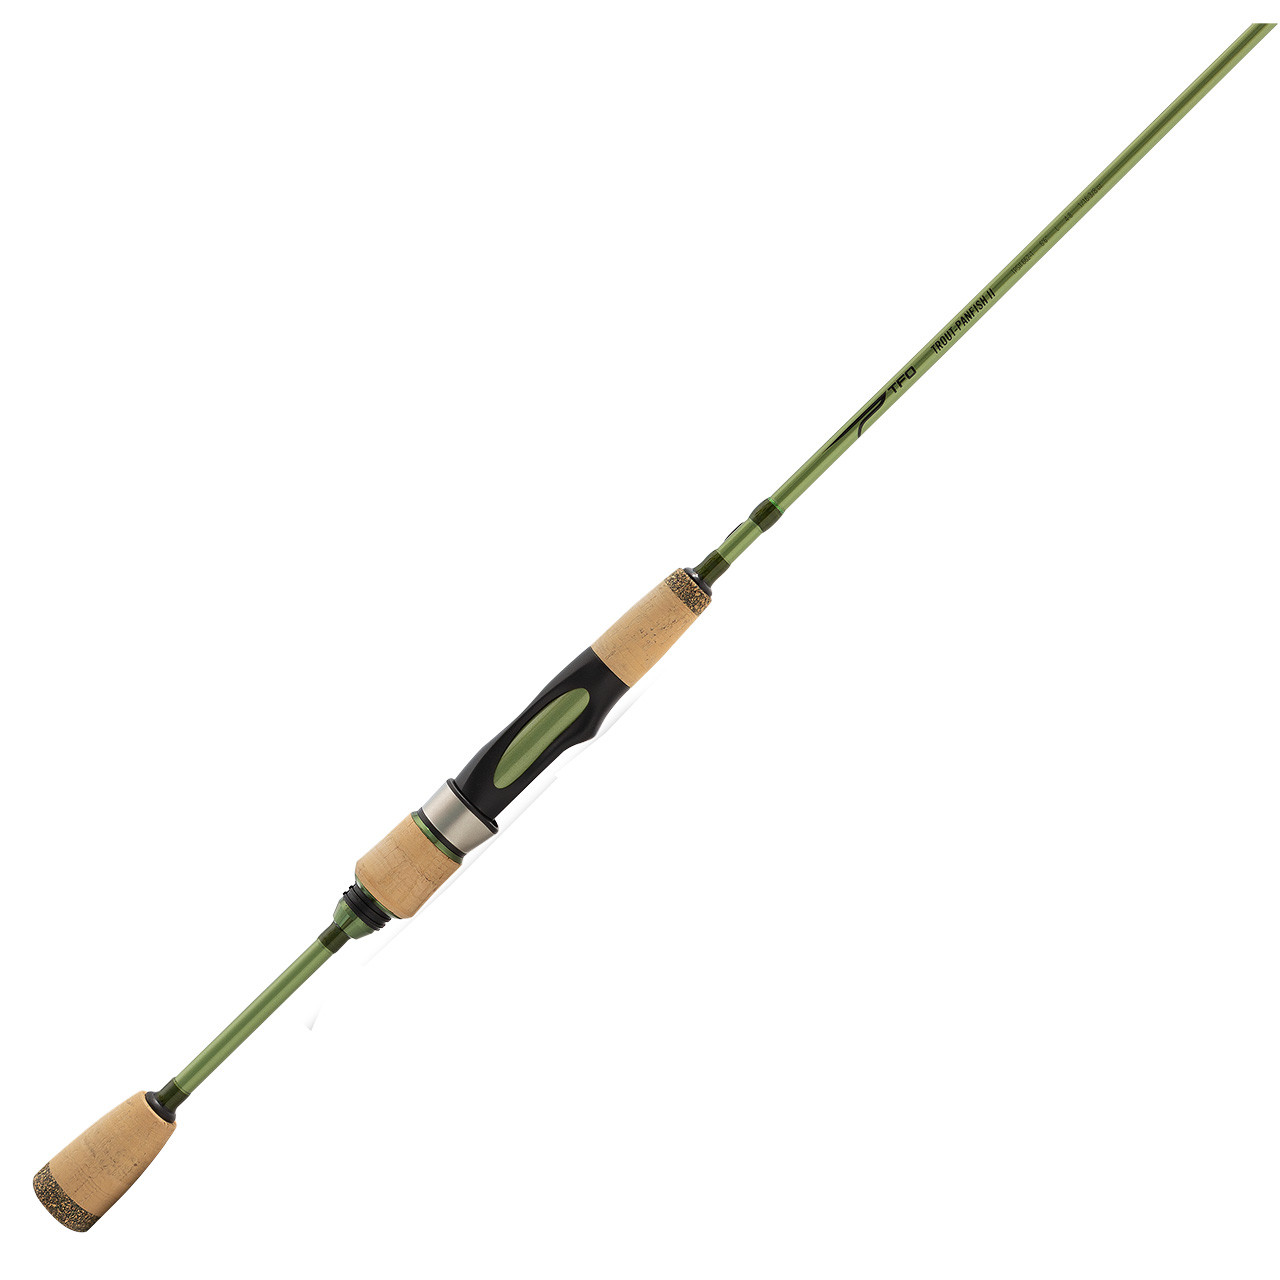 Fishing Kit Spinning Trout Area Rod 180 cm + Reel + Spoon Holder